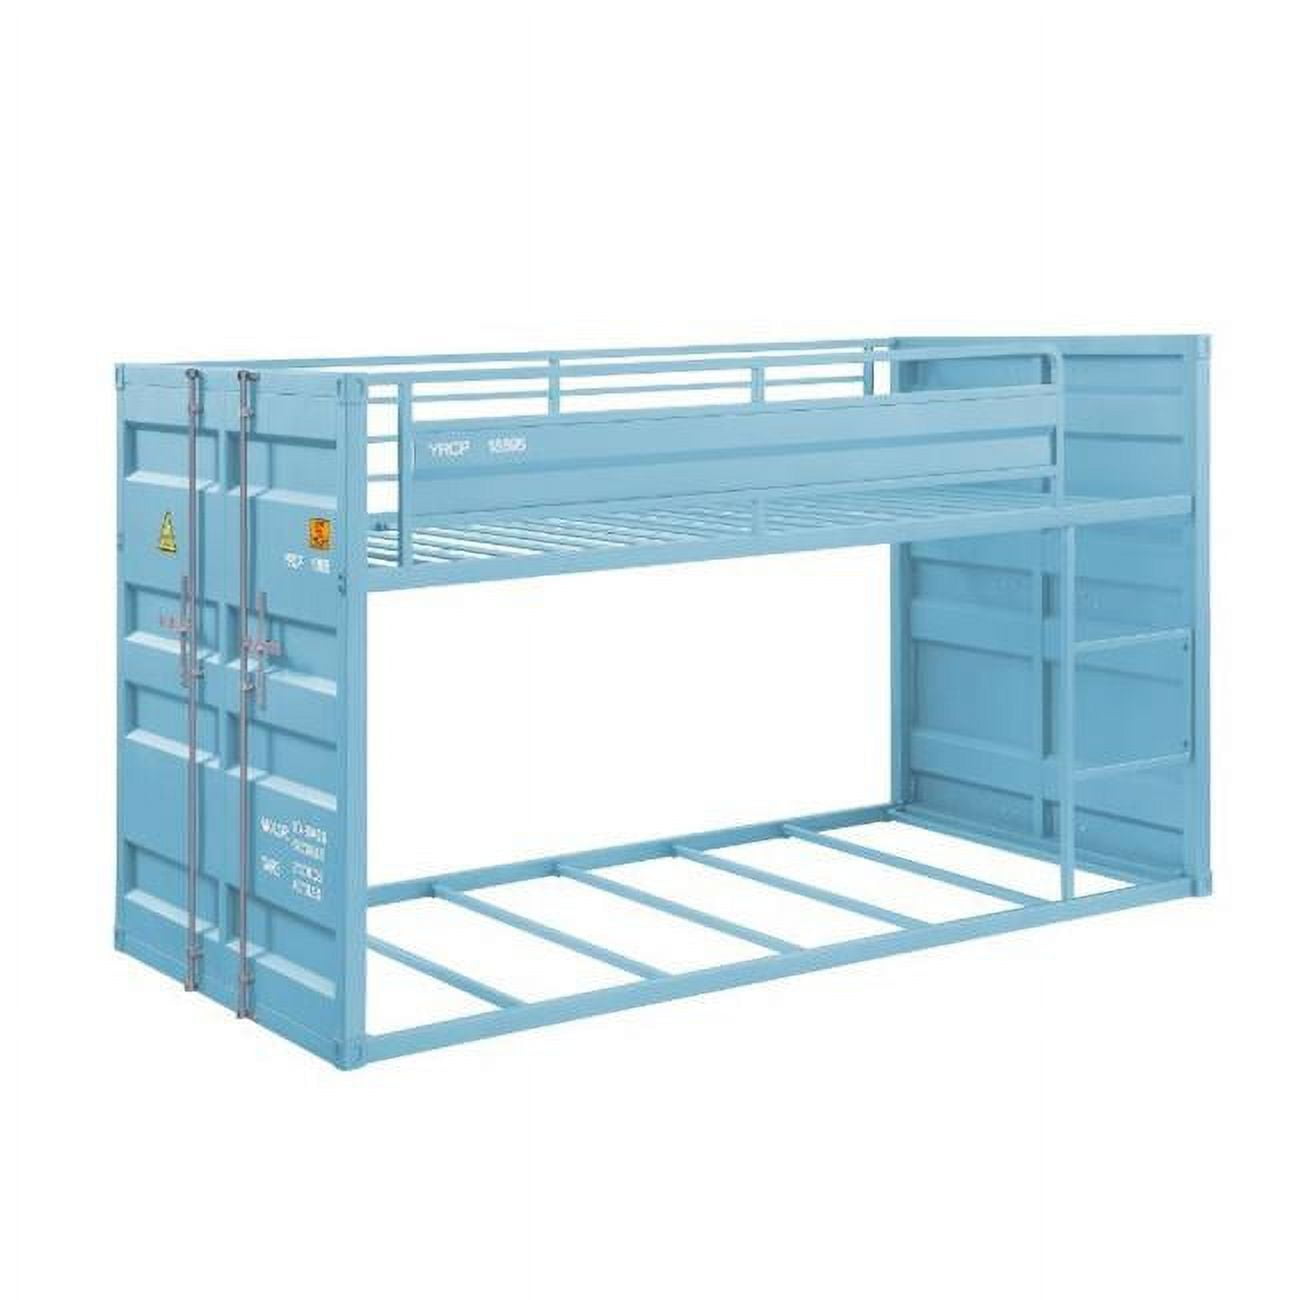 Picture of Acme Furniture 37810 80 x 42 x 46 in. Cargo Bunk Bed, Aqua - Twin Size - Case of 2